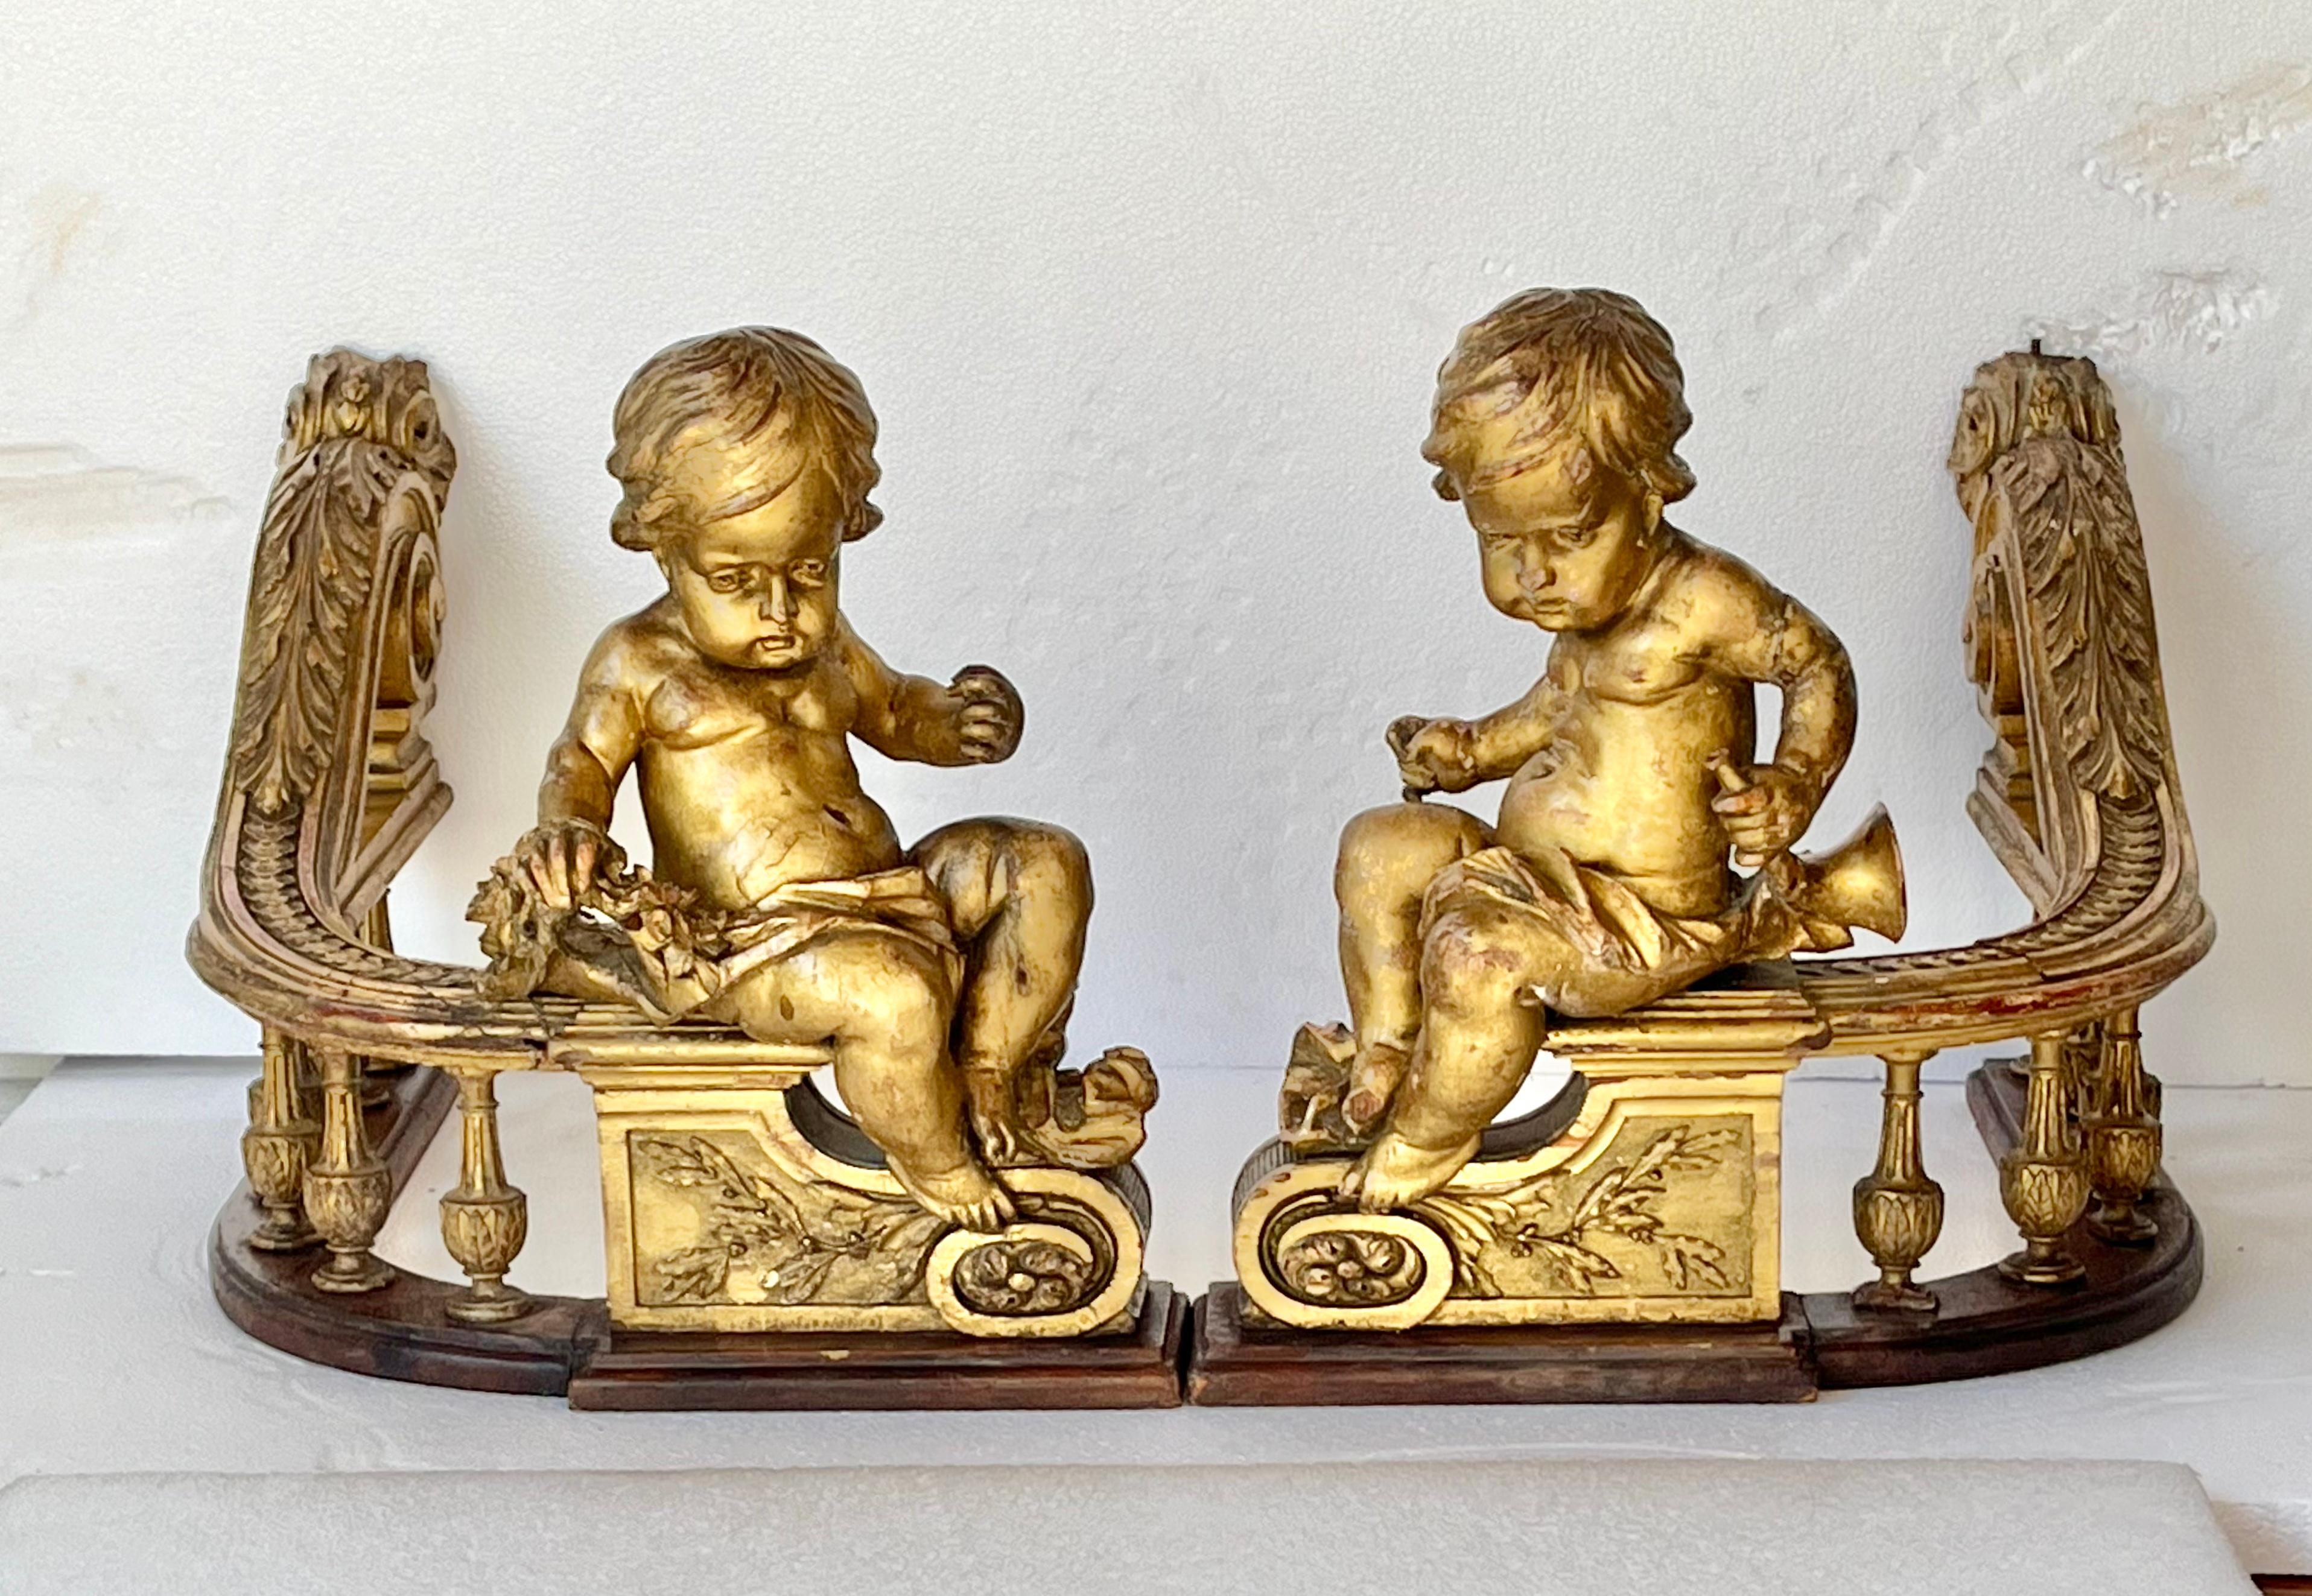 Pair or set of giltwood fragments possibly to a larger ensemble , possibly for a table or chest . Each cherub or putti carved of wood uniquely  in styled poses , both with carved draping , one with carved floral garland . 

Appears to be of secular